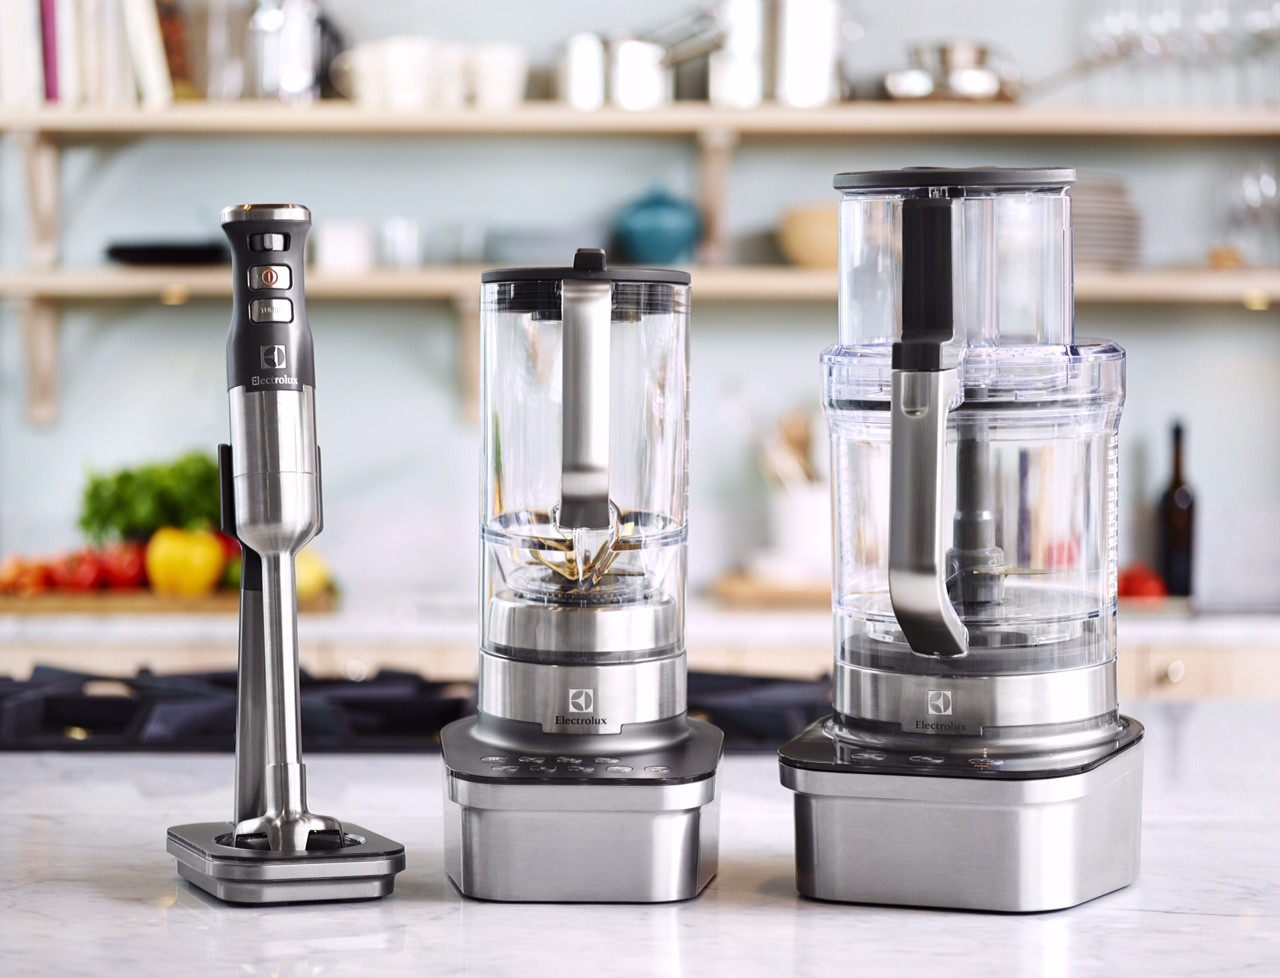 Small Kitchen Appliances
 Electrolux Introduces State of the Art Small Kitchen